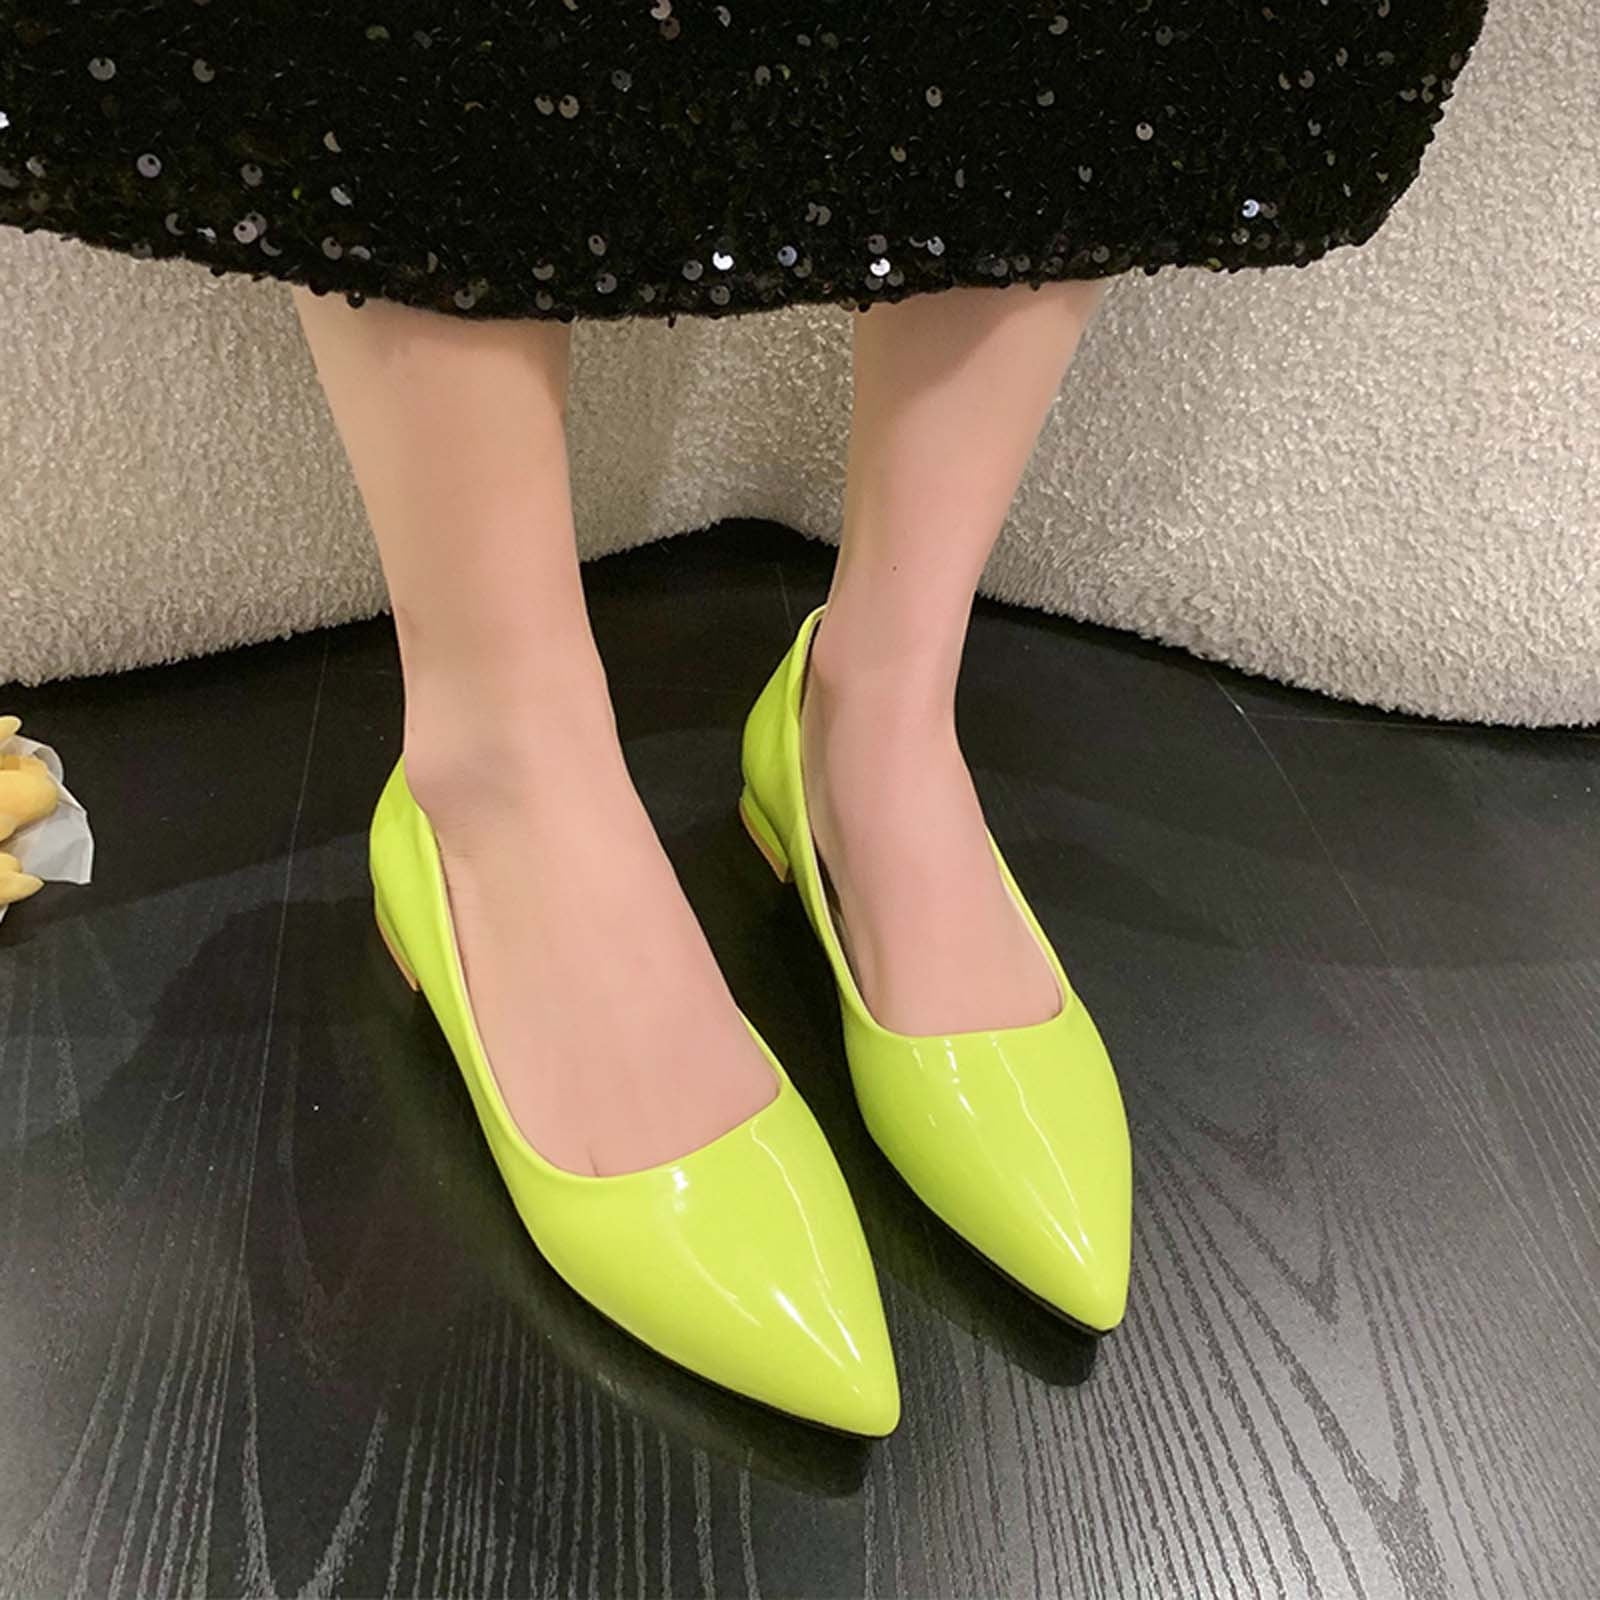 Comfortable Genuine Leather Dressy Low Heel Shoes For Women Black And White  Wedding Shoes With Thin High Heels Ideal For Office And Work Style 013023H  From Qwertyui879, $25.63 | DHgate.Com